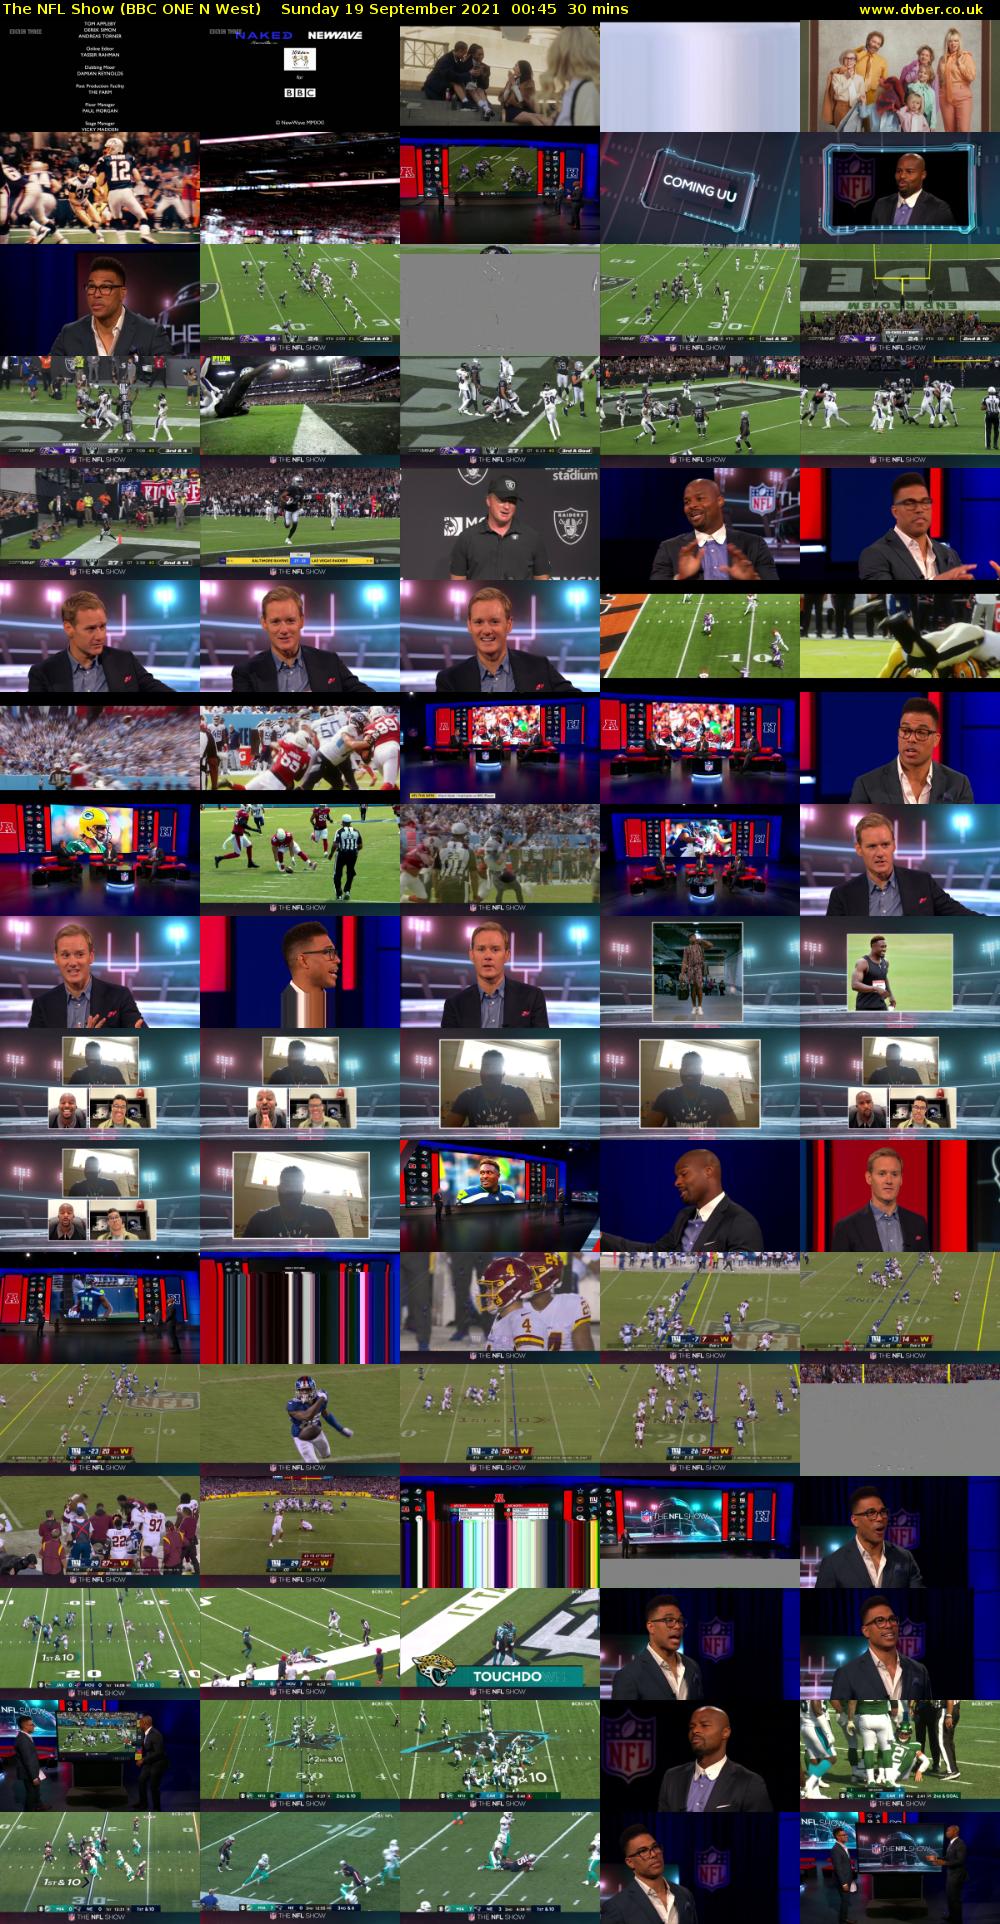 The NFL Show (BBC ONE N West) Sunday 19 September 2021 00:45 - 01:15